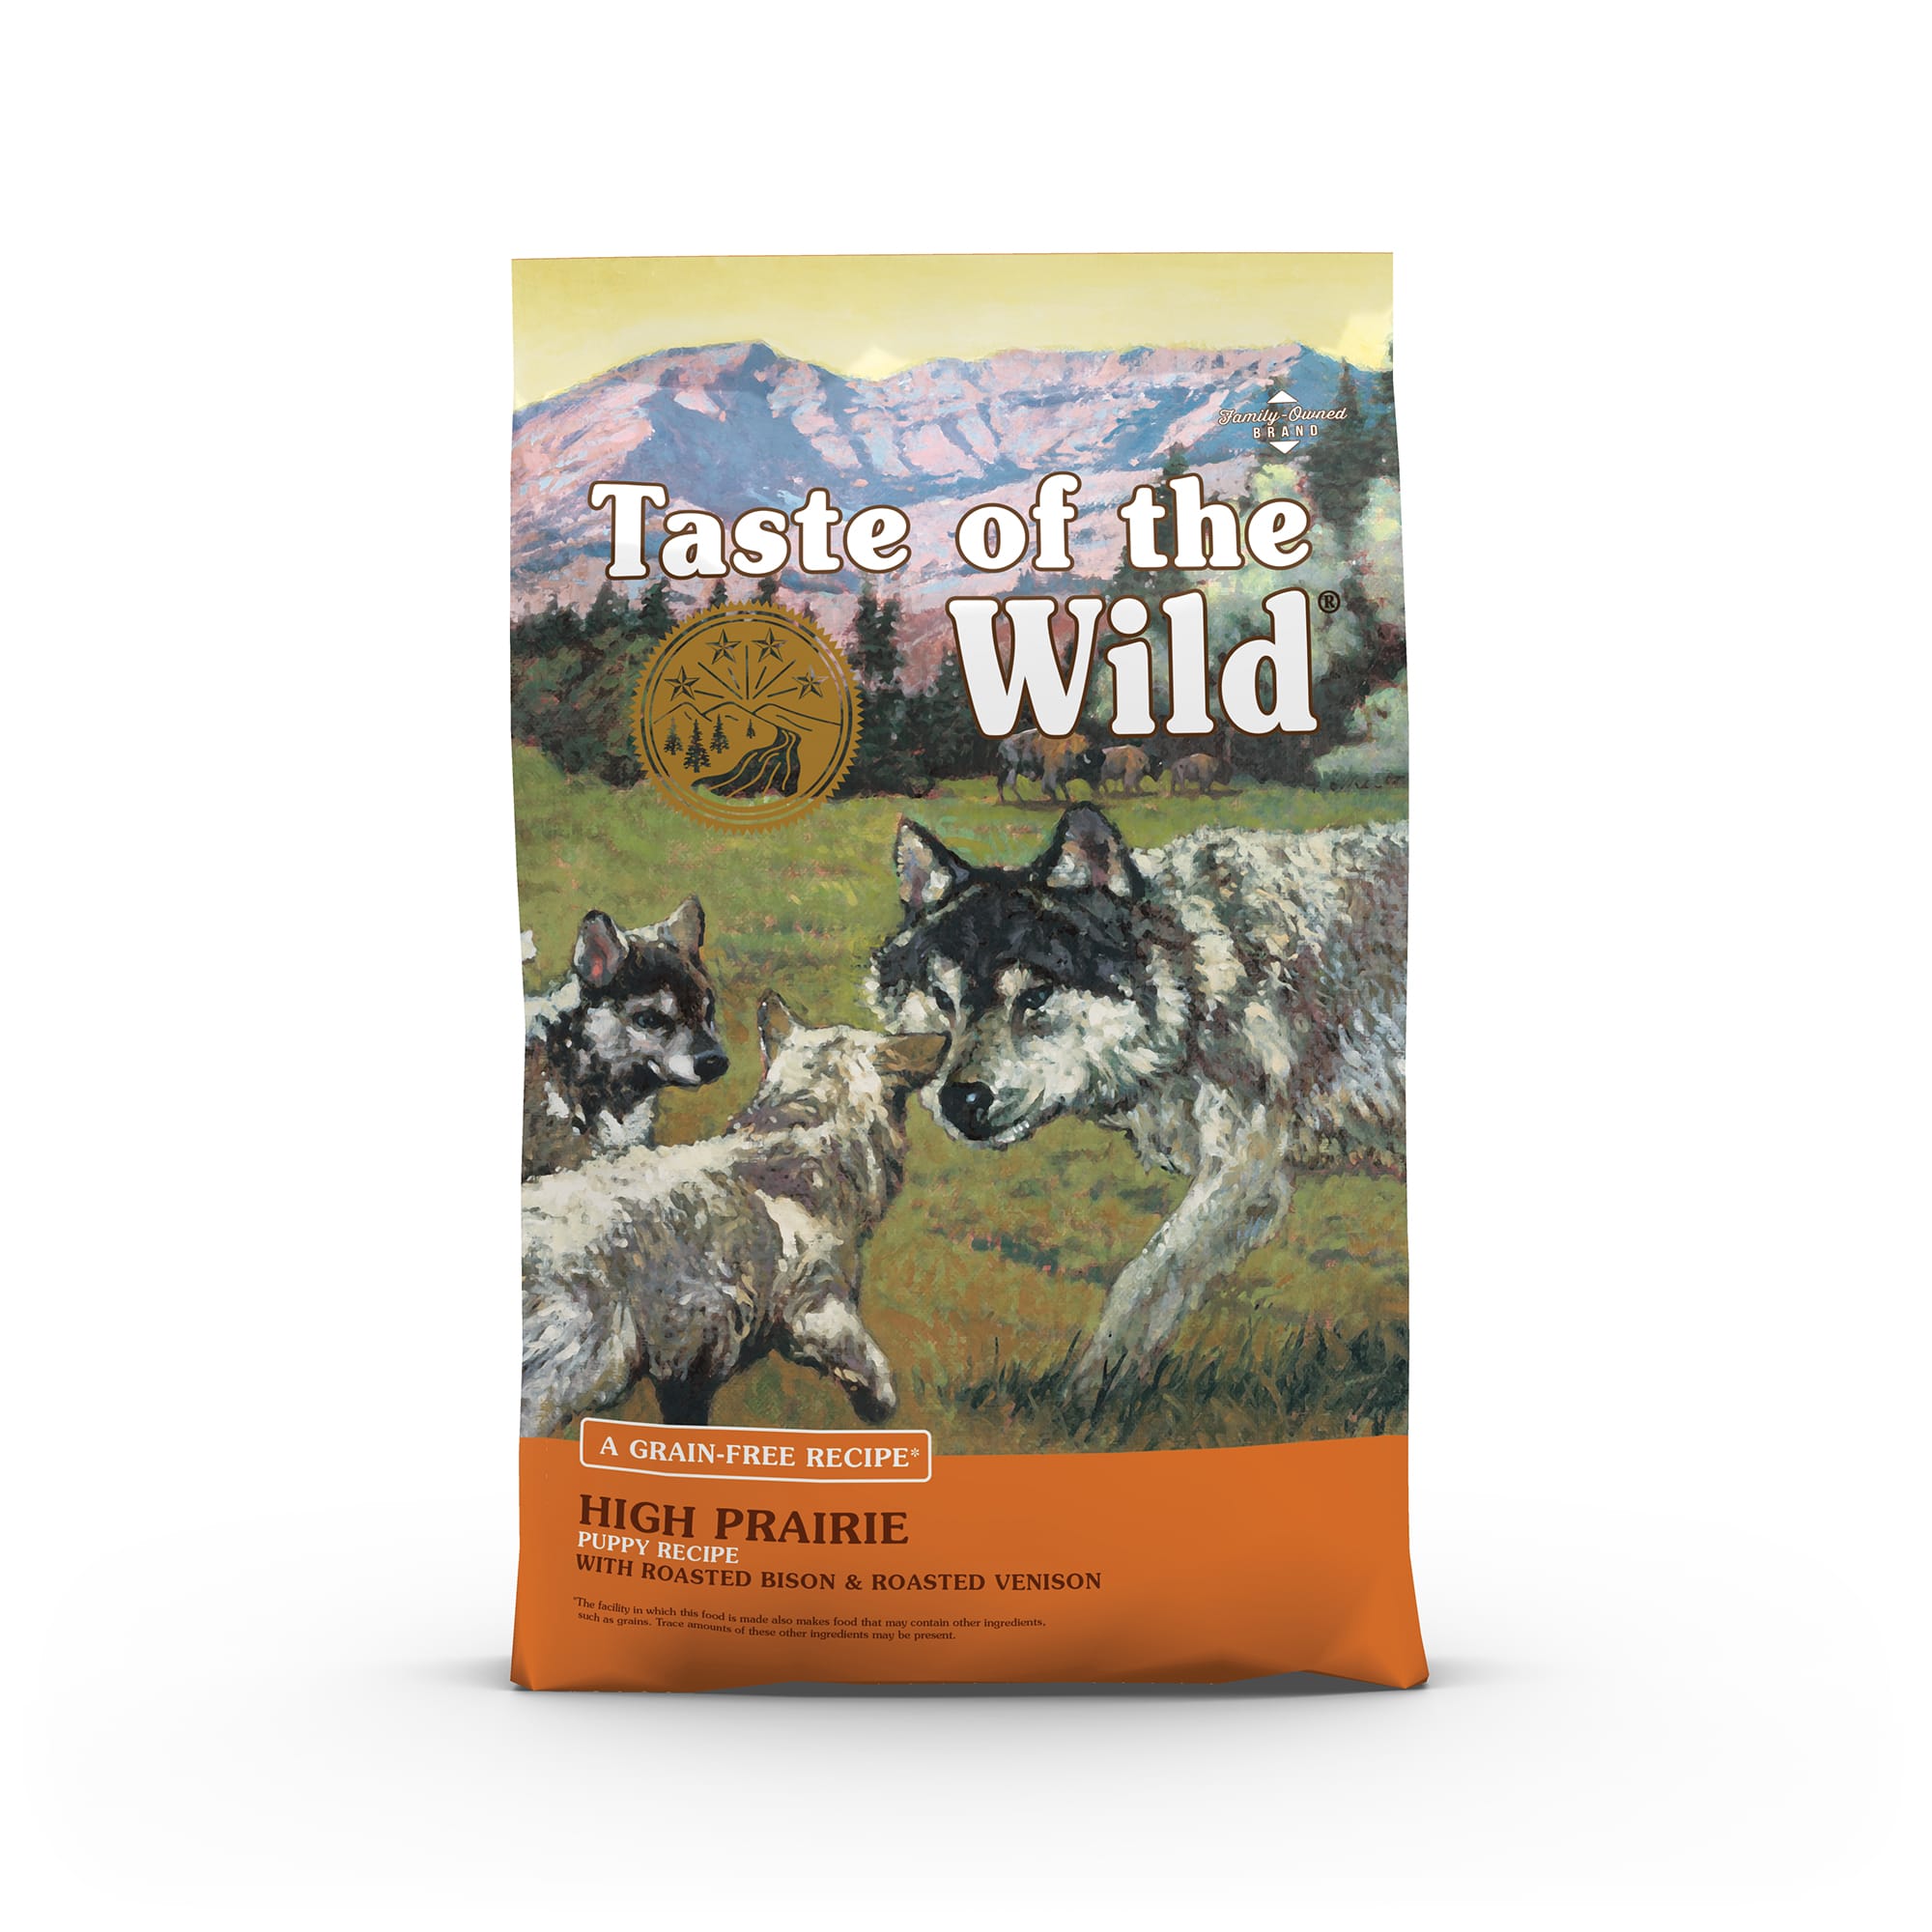 Taste Of The Wild High Prairie Grain Free Roasted Bison Venison Dry Puppy Food 28 Lbs Petco Most of the ingredients found in taste of the wild dog foods are sourced in the united states. taste of the wild high prairie grain free roasted bison venison dry puppy food 28 lbs